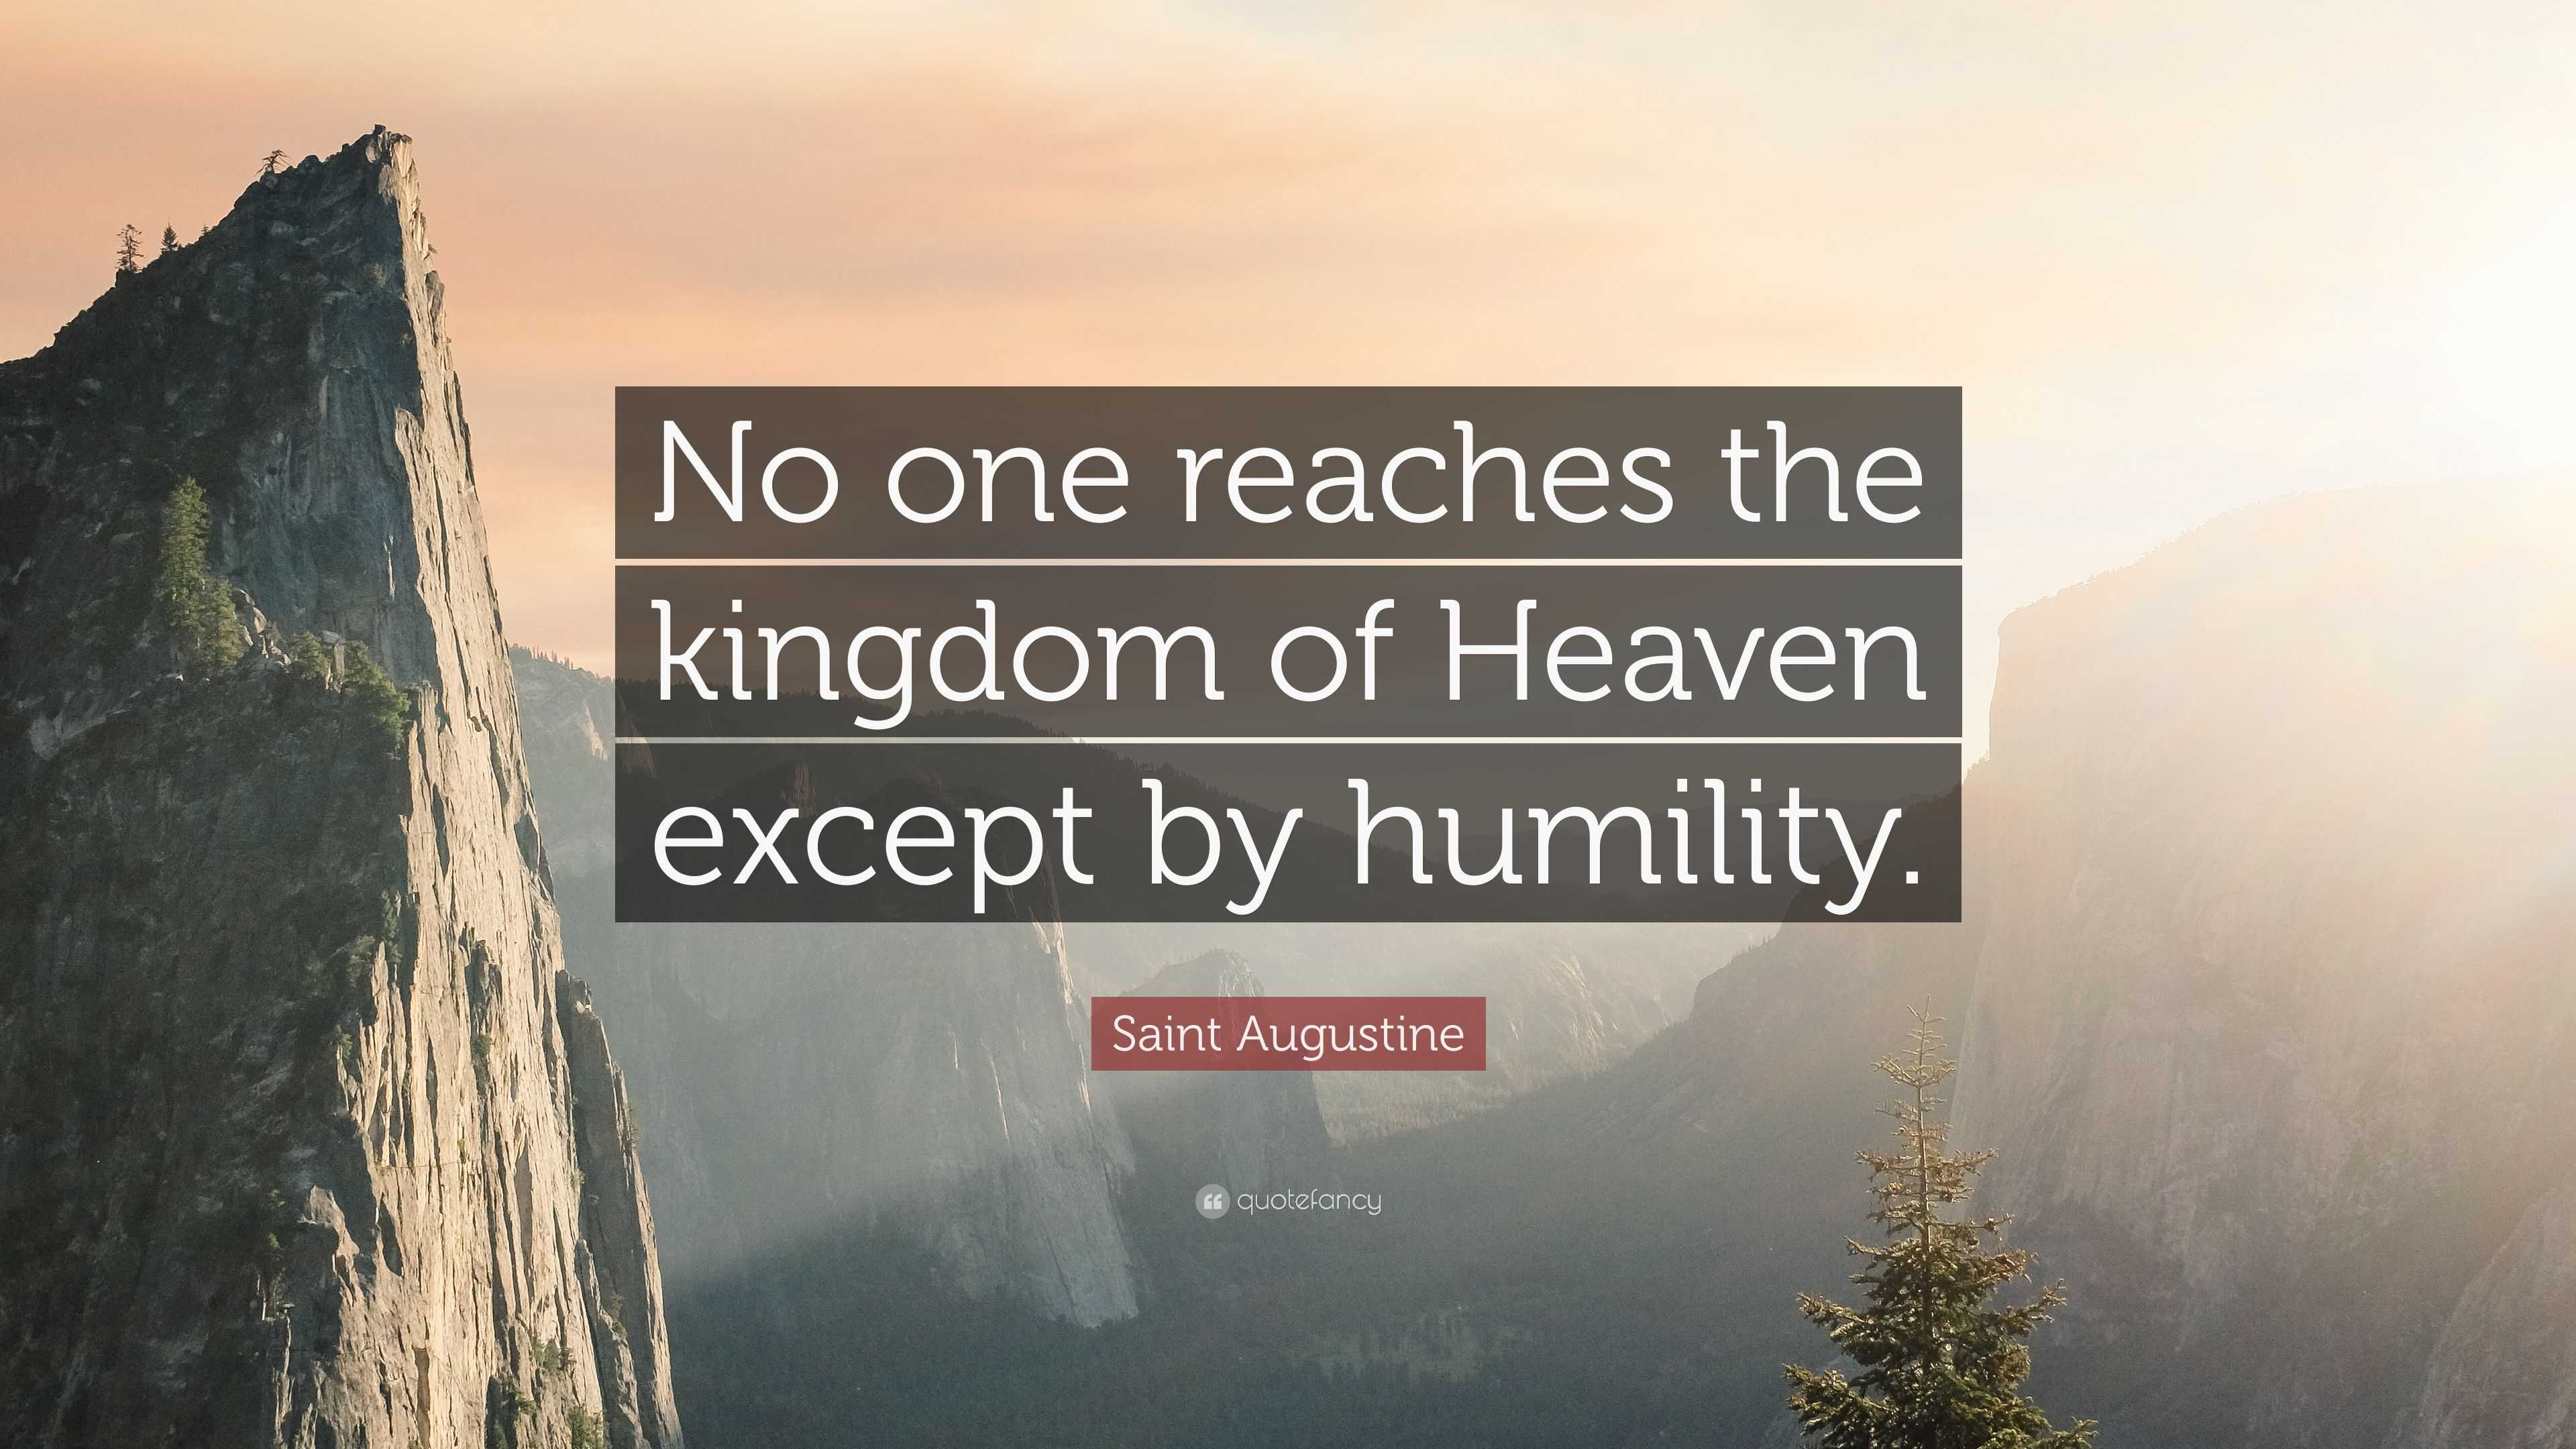 Saint Augustine Quote “No one reaches the kingdom of